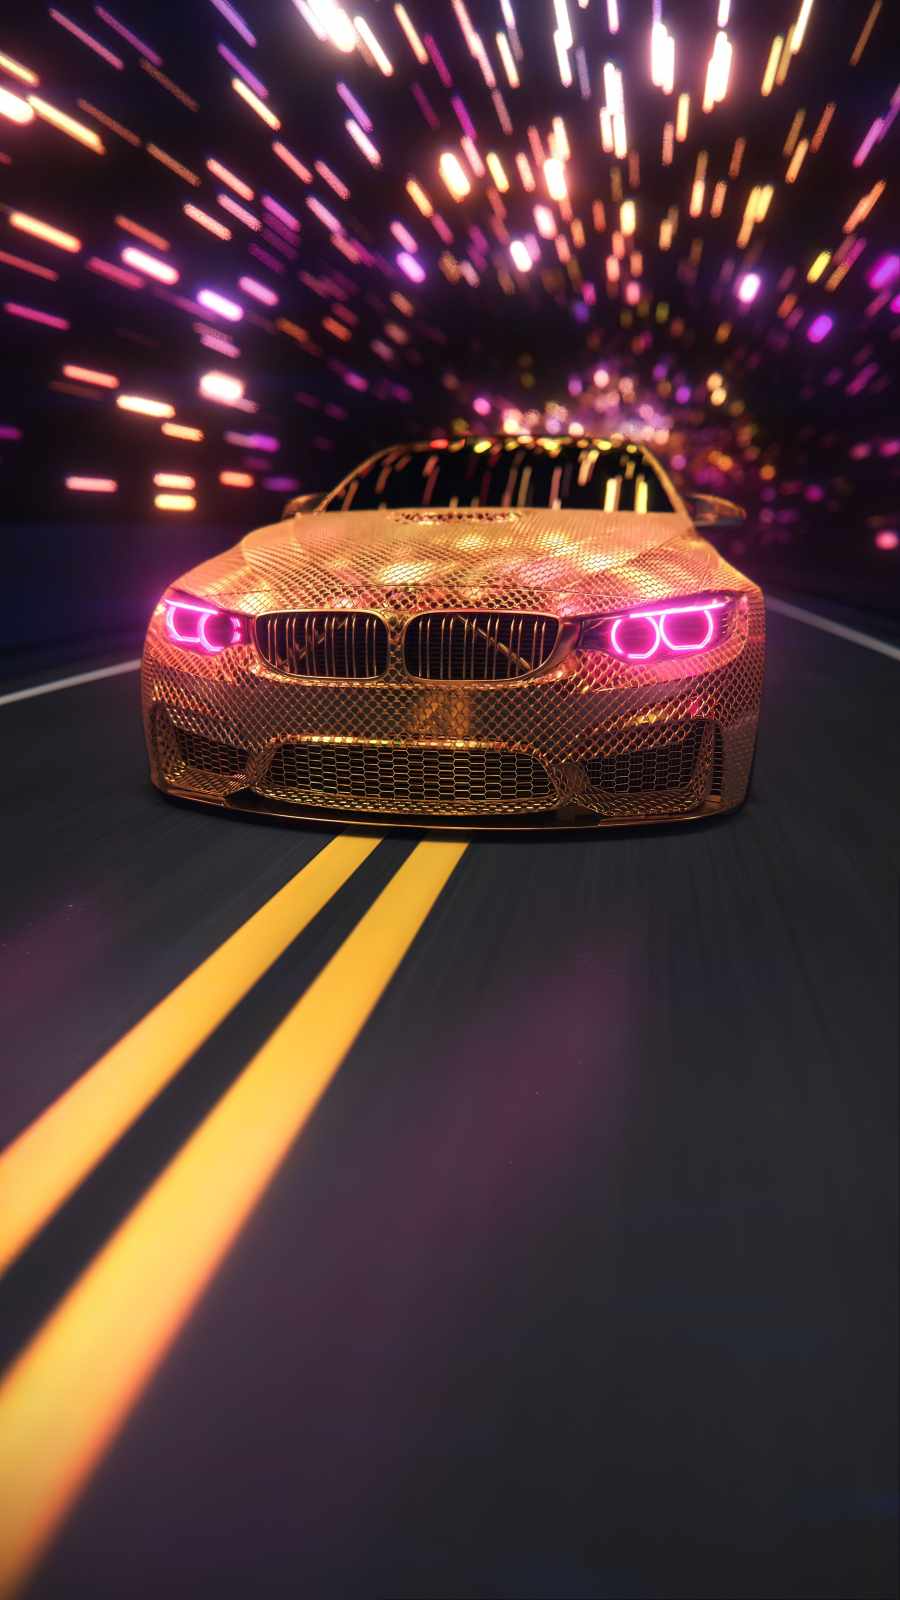 BMW M3 wallpaper by P3TR1T  Download on ZEDGE  a446